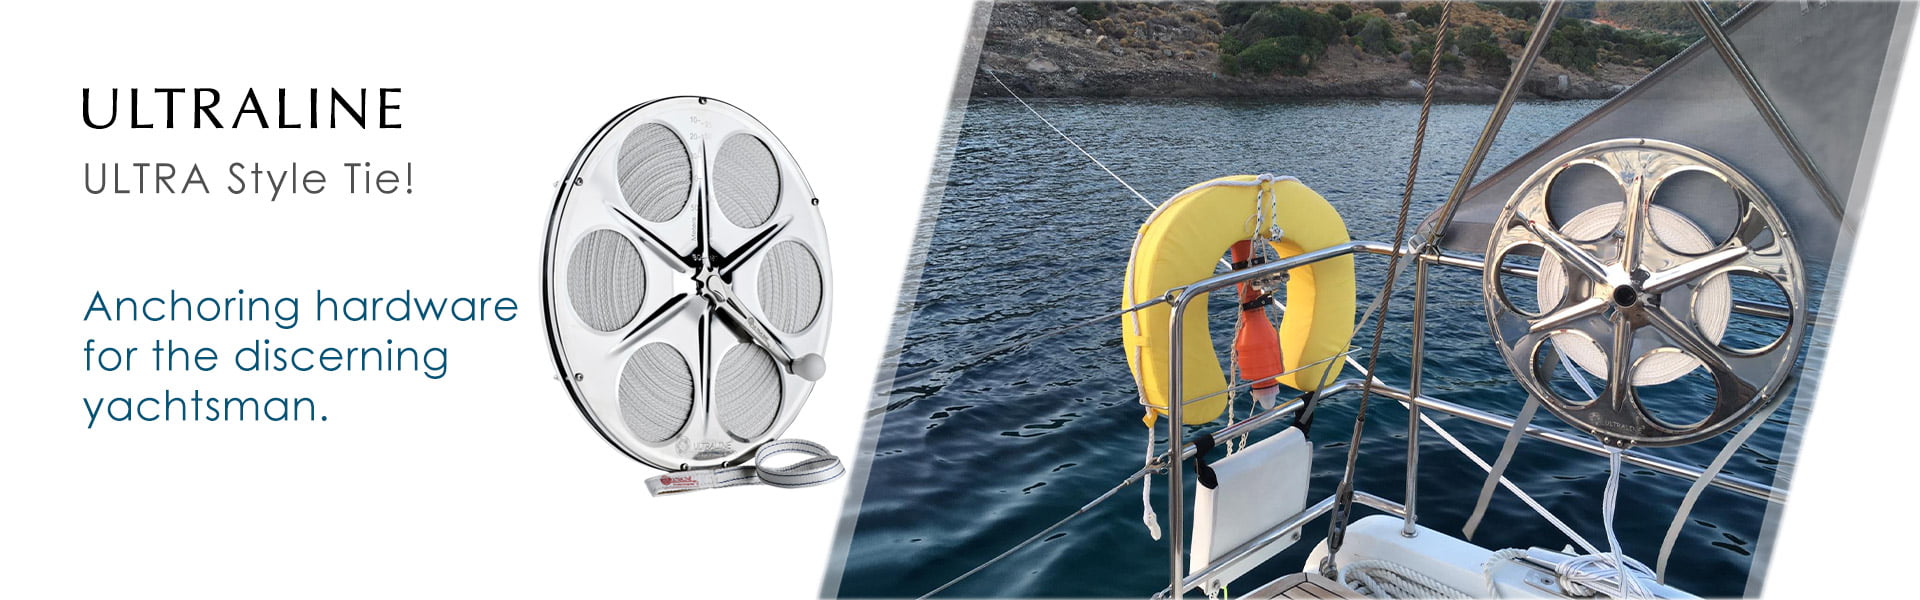 Marine Boat Flat Rope Reel for Anchoring and Mooring Dock Lines